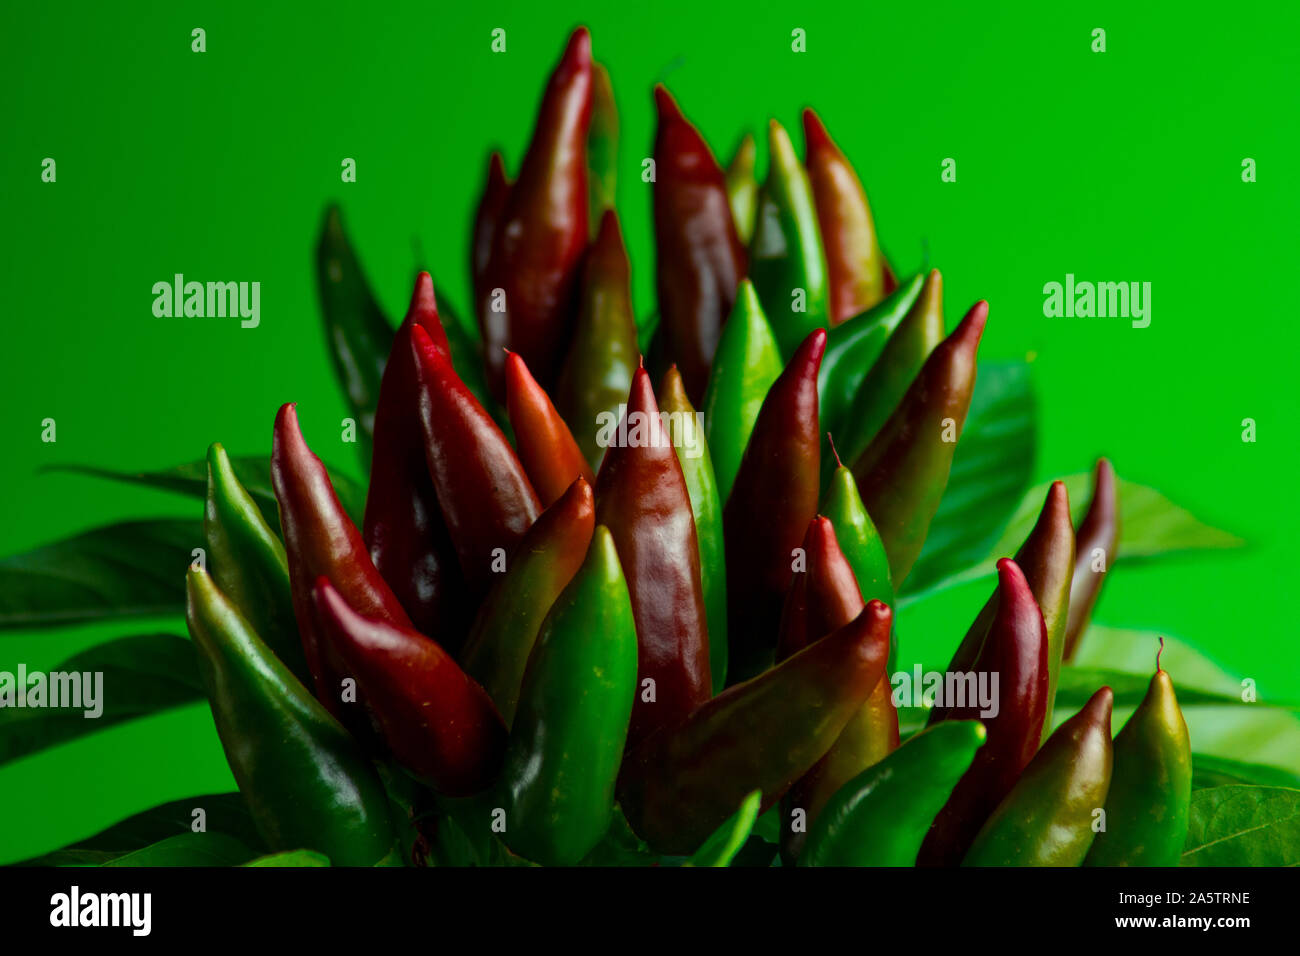 Chili pepper saltillo (Capsicum annum) plant, with lots of chilis. Ripe and unripe peppers on plant. Green, orange and red chilis. Green background. Stock Photo